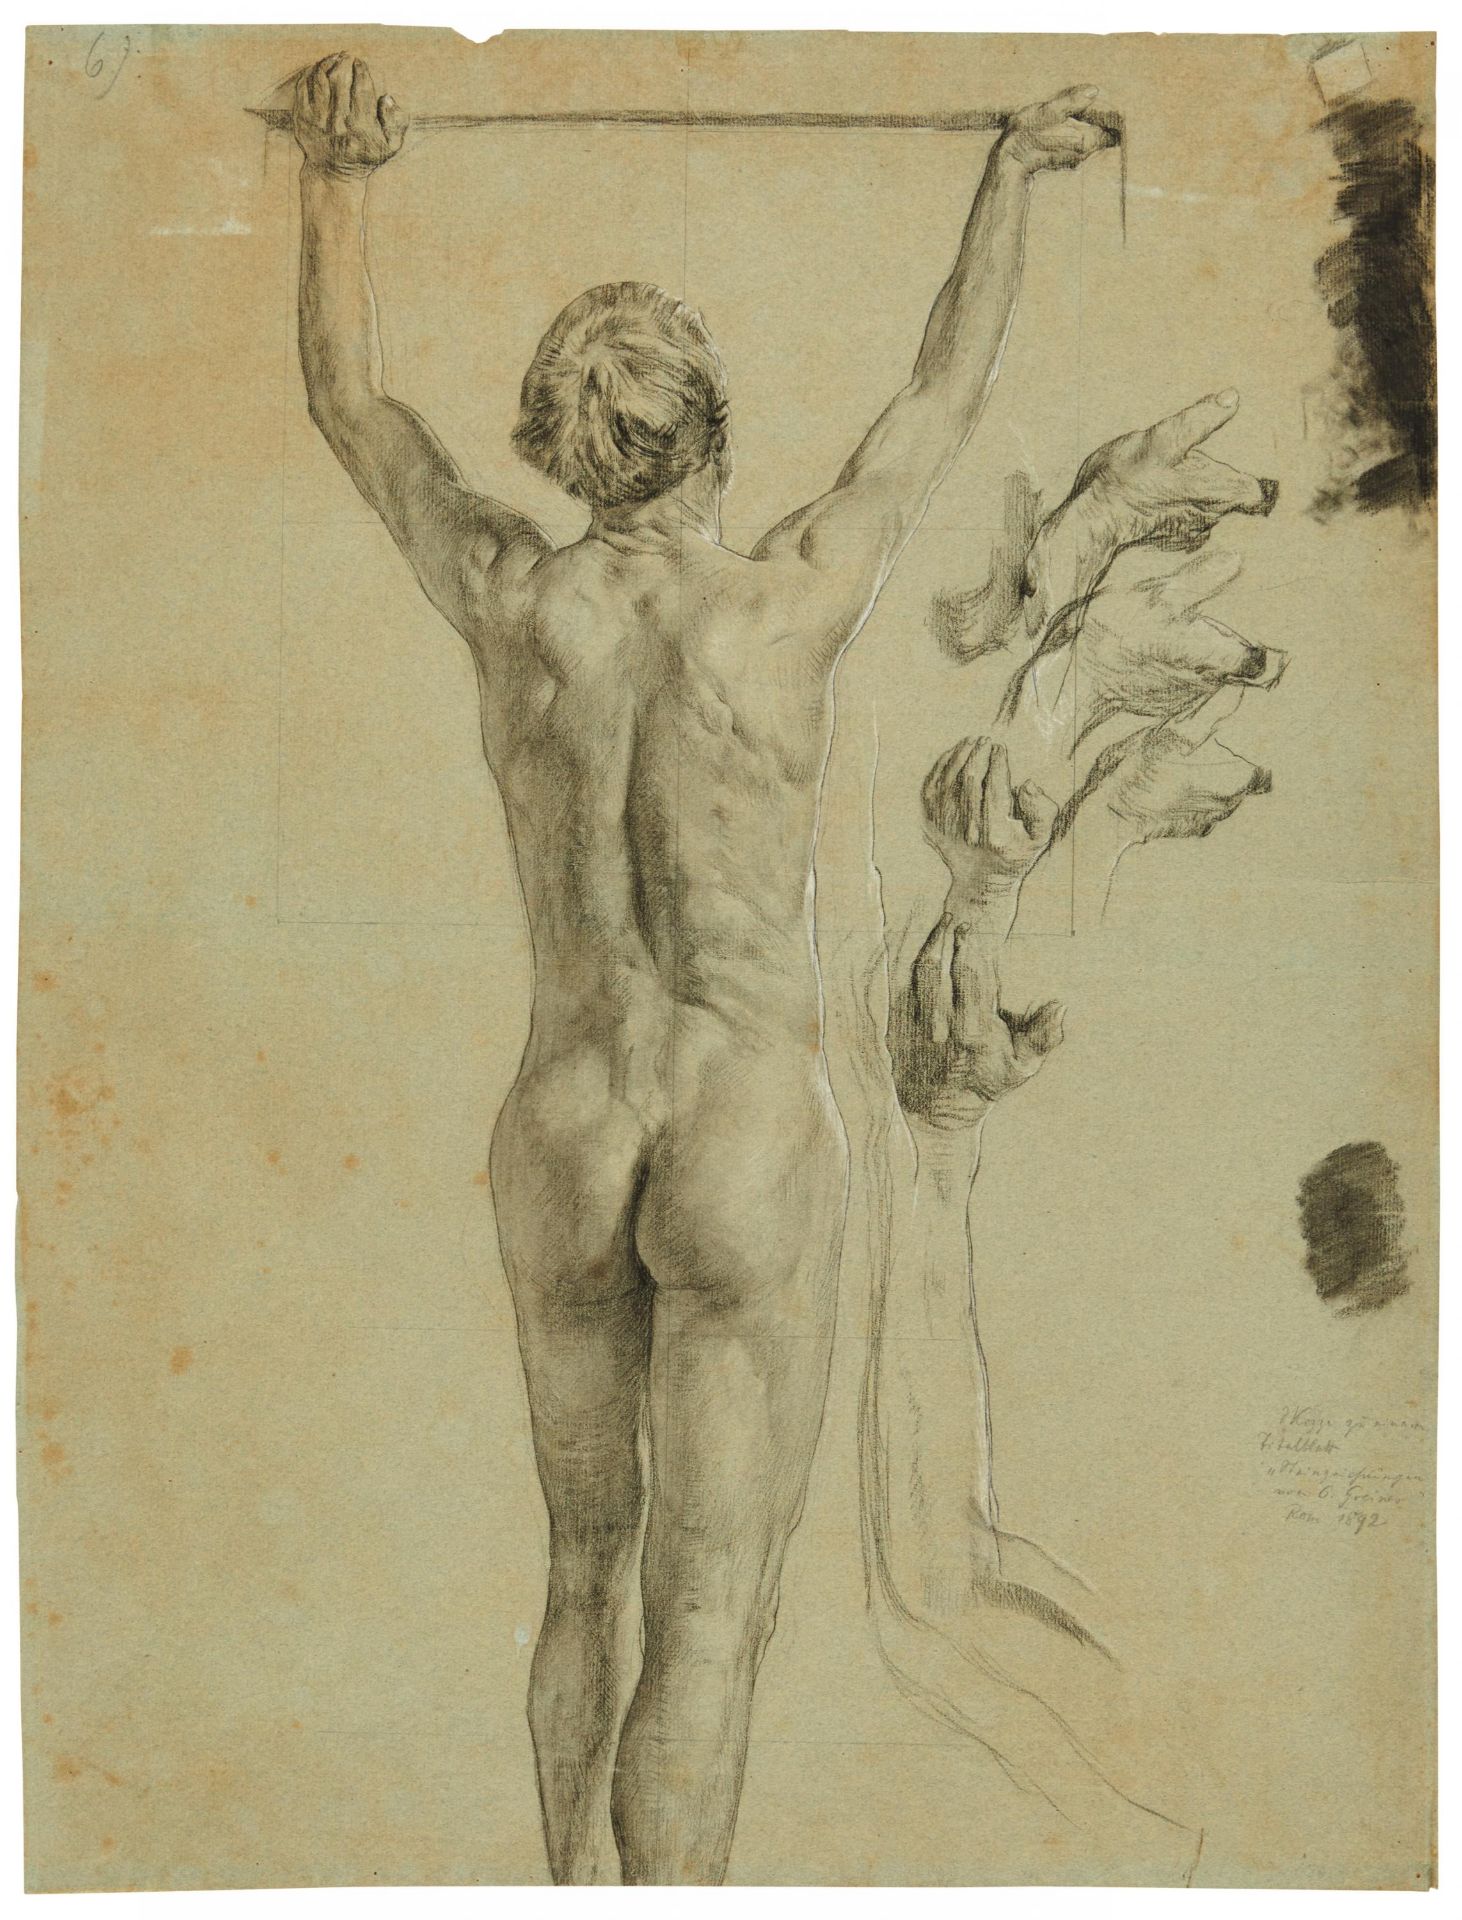 Otto Greiner: Nude Study of a Young Boy from Behind as well as Studies of a Hand